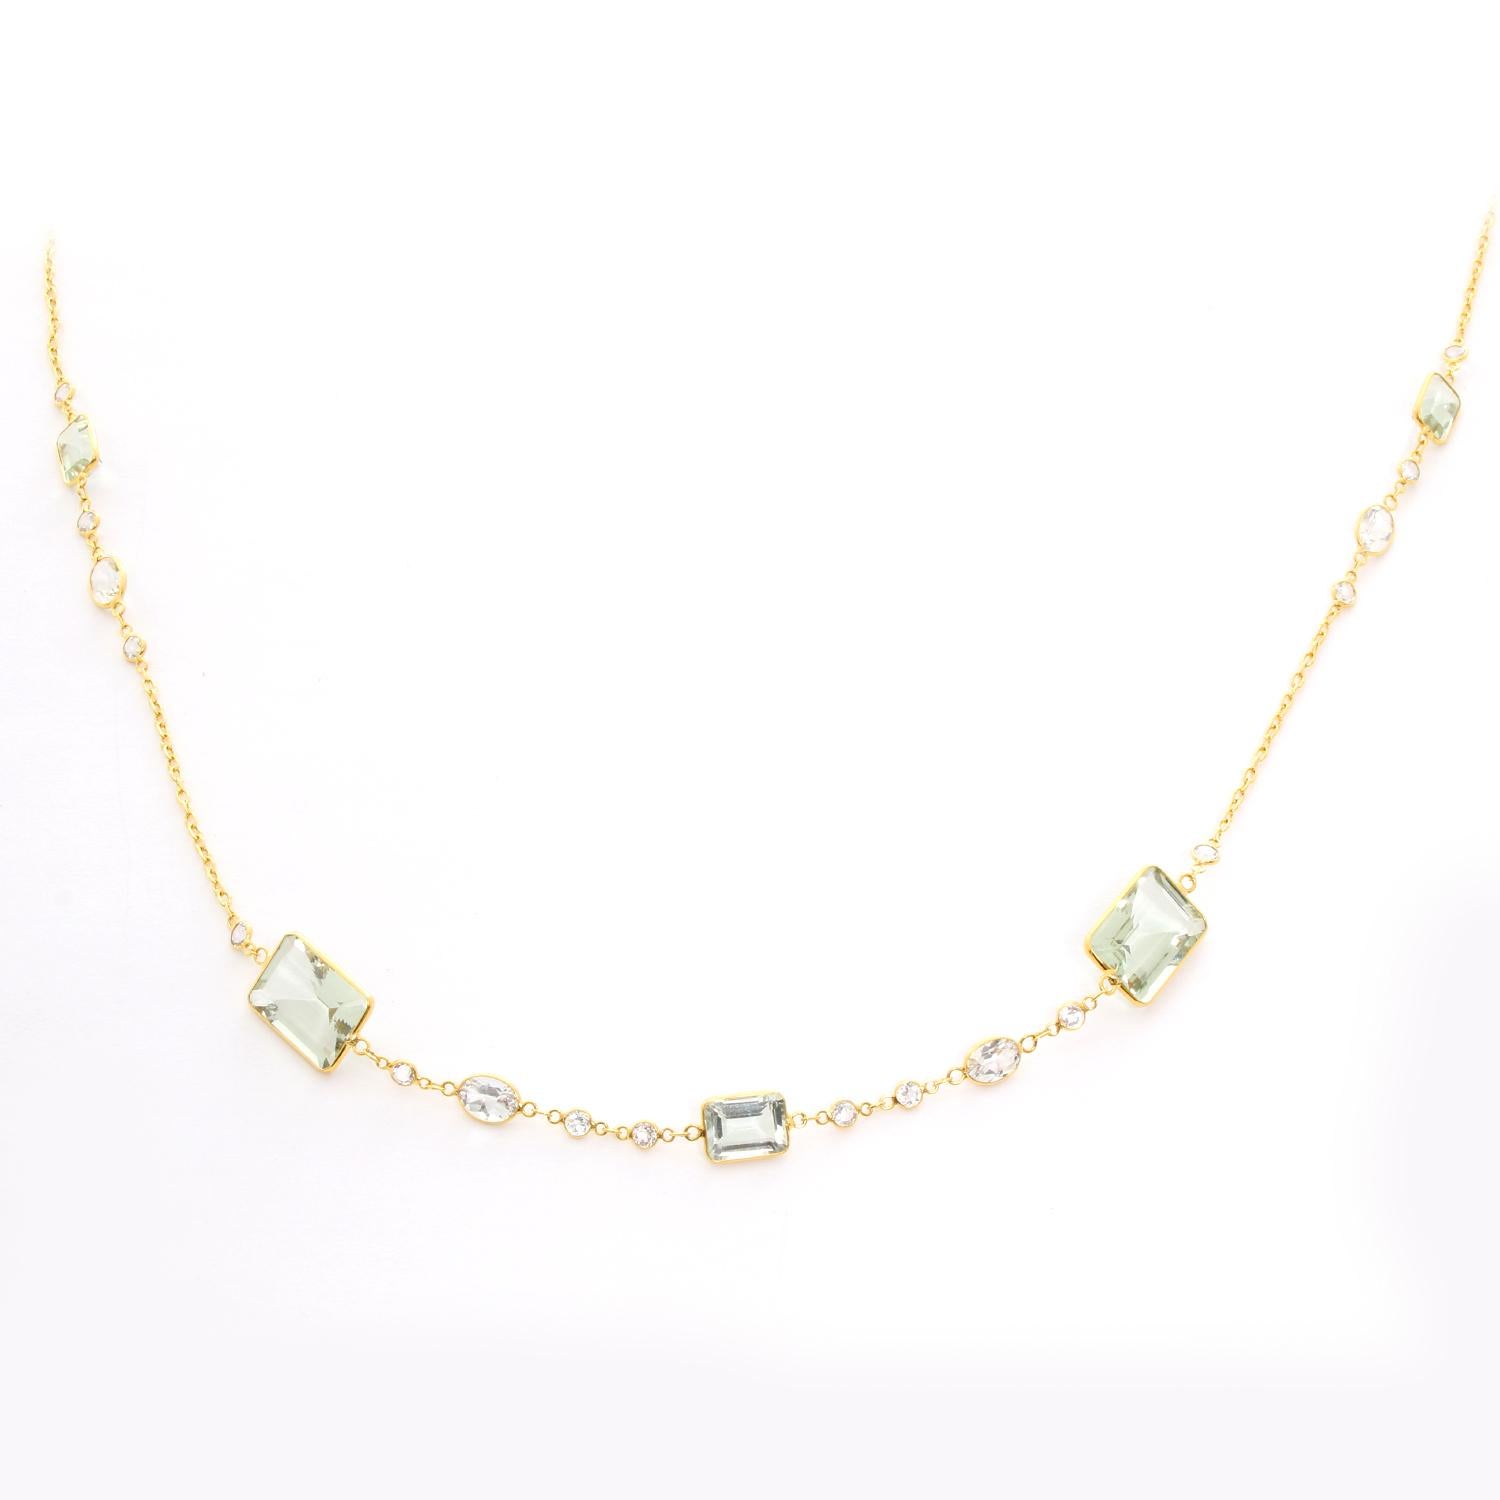 Women's or Men's 14 Karat Yellow Gold White Topaz and Green Amethyst by the Yard Necklace